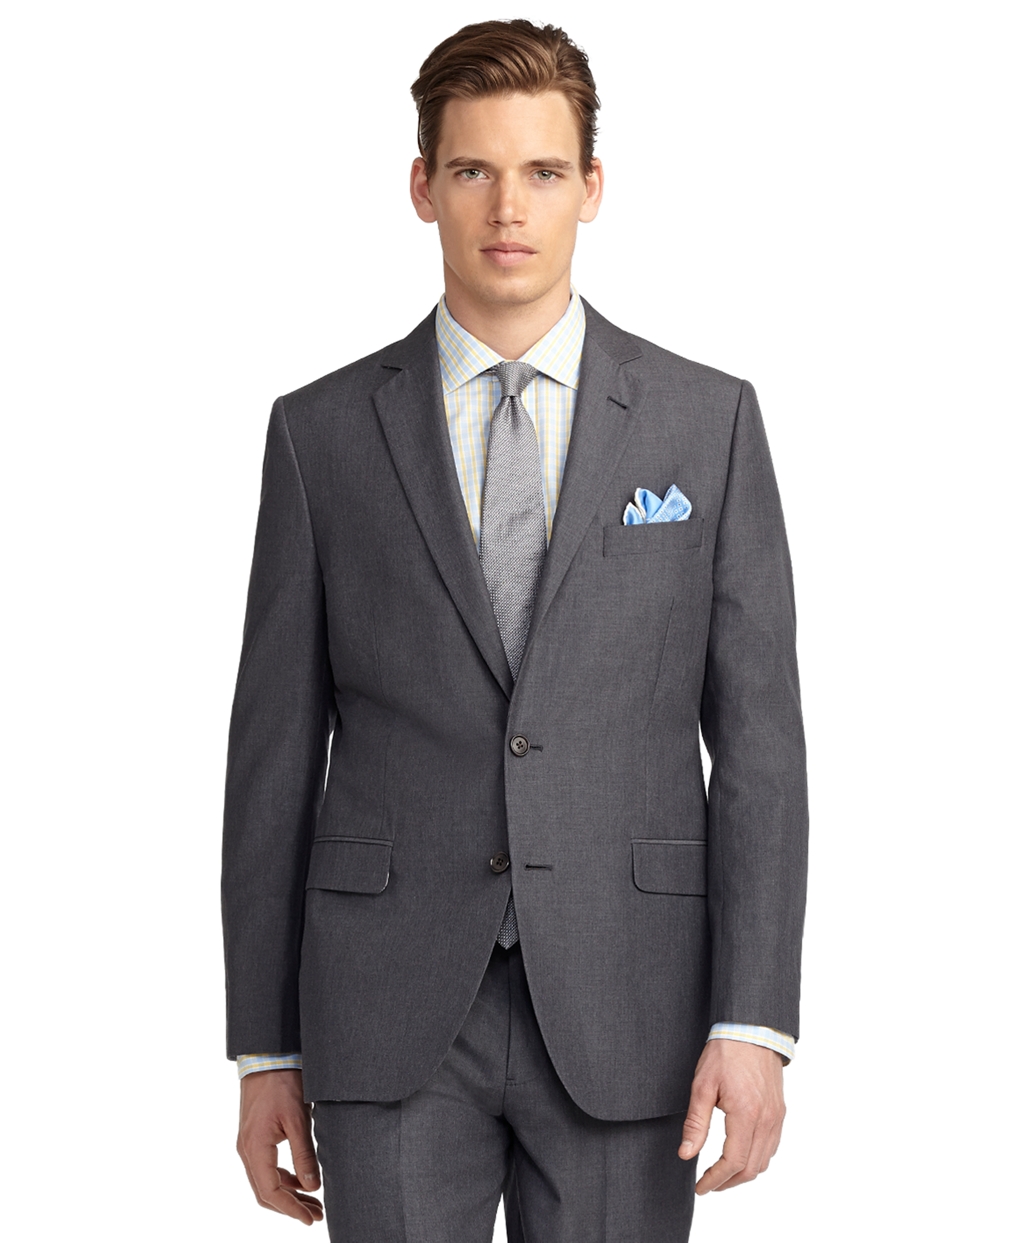 Brooks Brothers Fitzgerald Fit Melange Suit in Grey (Gray) for Men - Lyst